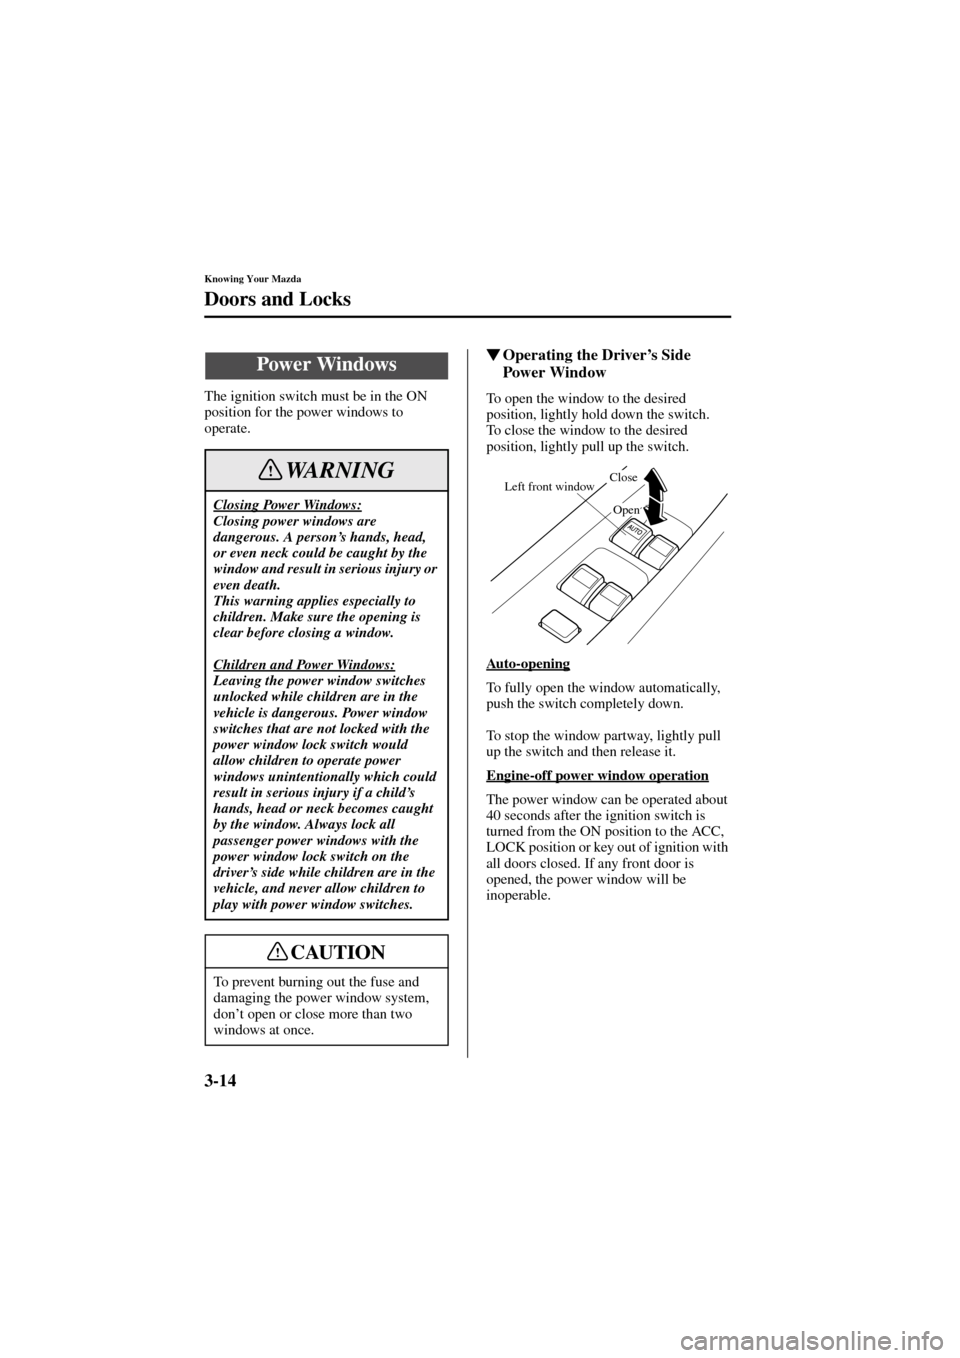 MAZDA MODEL 6 2004  Owners Manual (in English) 3-14
Knowing Your Mazda
Doors and Locks
Form No. 8R29-EA-02I
The ignition switch must be in the ON 
position for the power windows to 
operate.
Operating the Driver’s Side 
Power Window
To open the